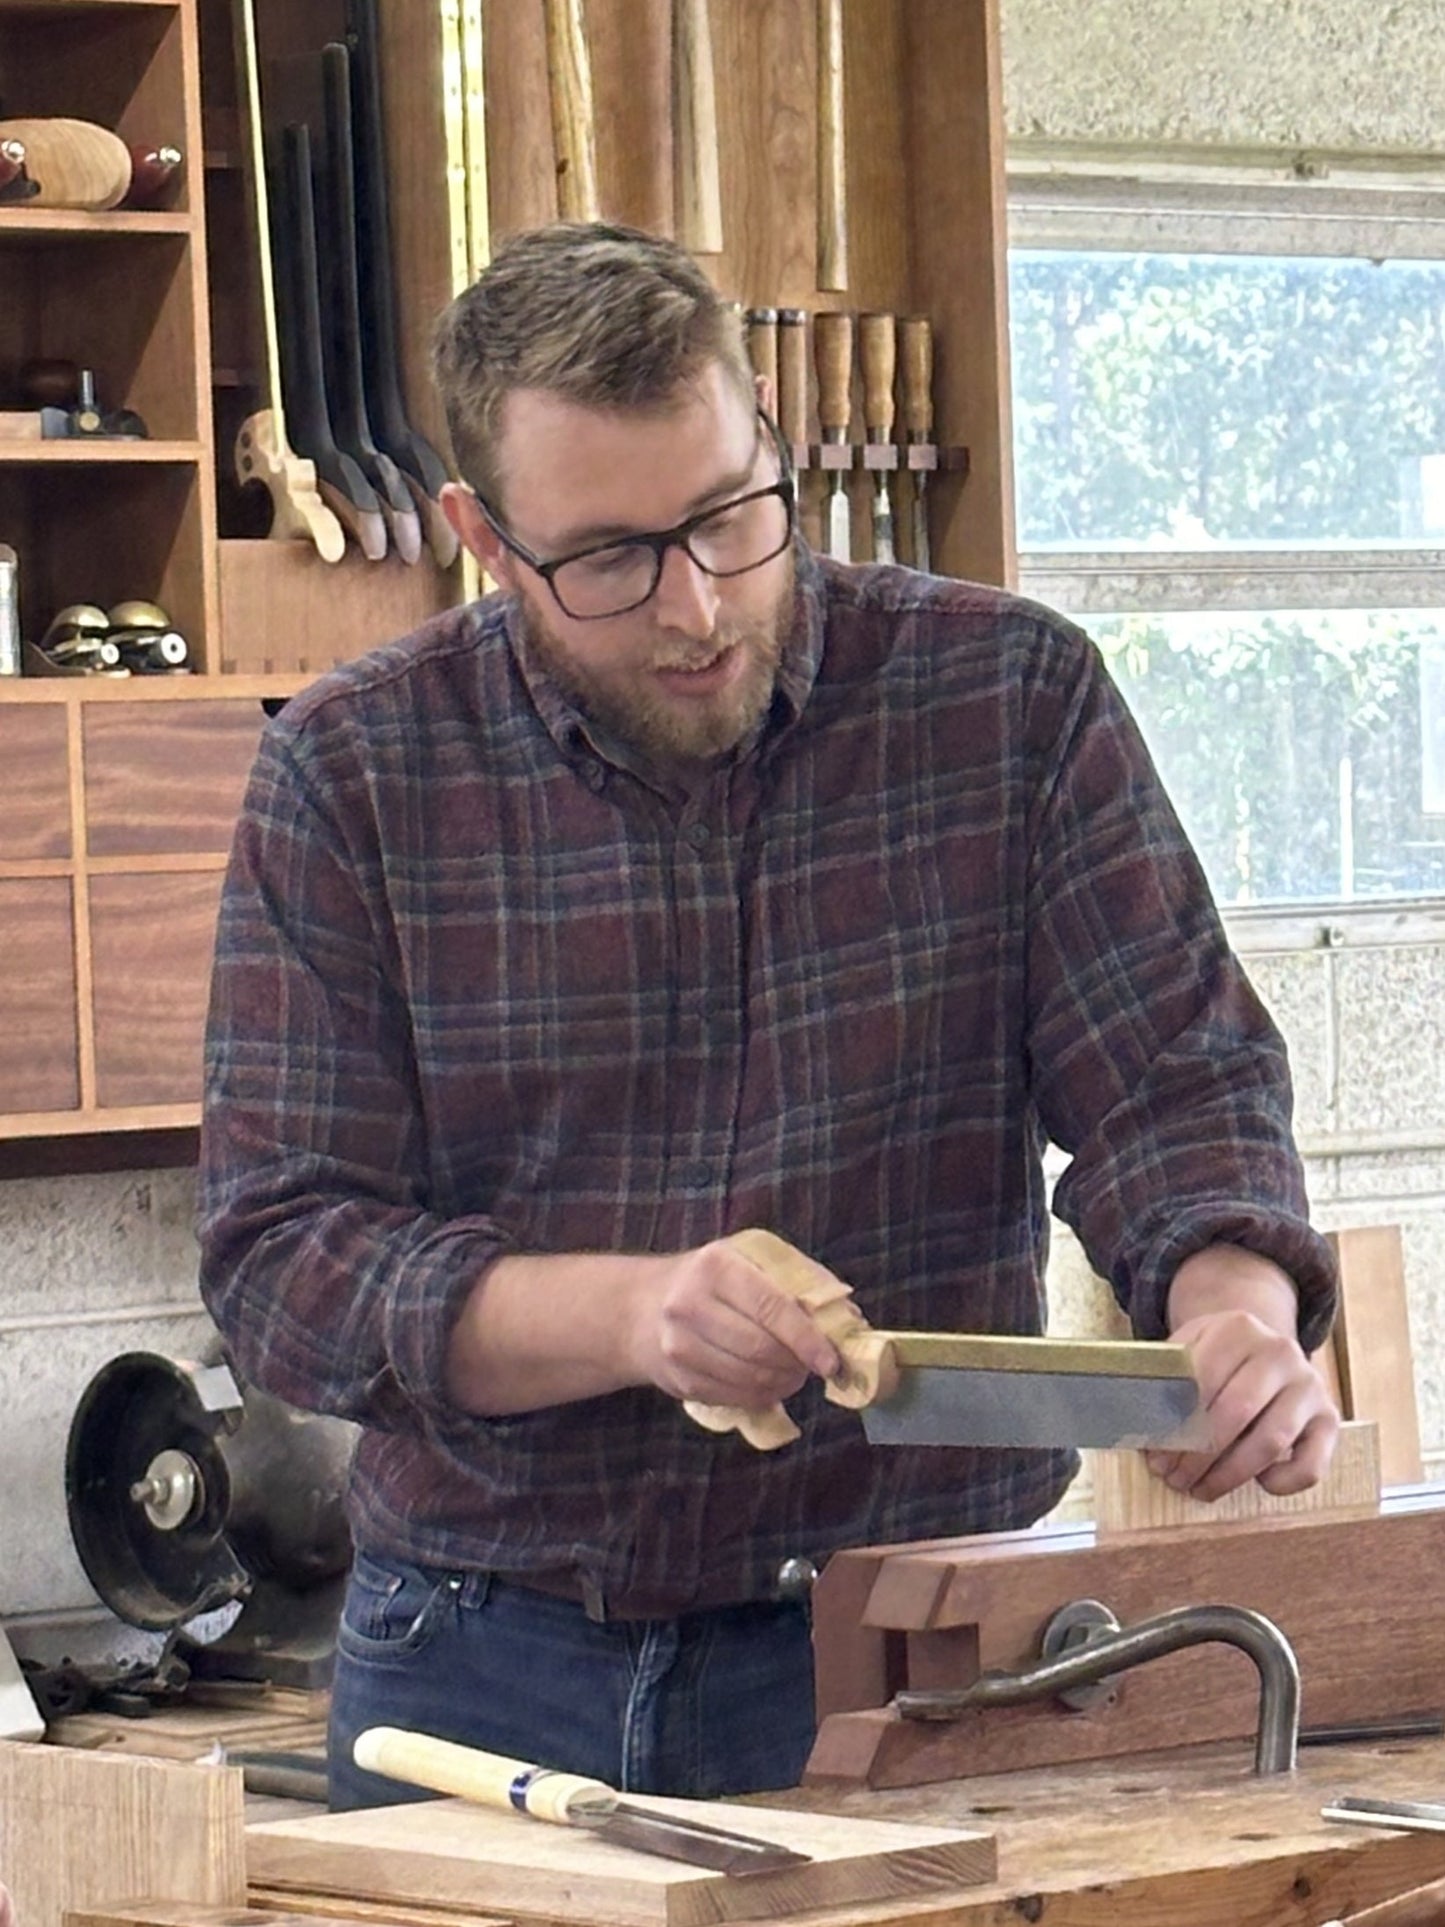 Handcut Dovetail Class with Curtis Hause - June 8th @ Noon